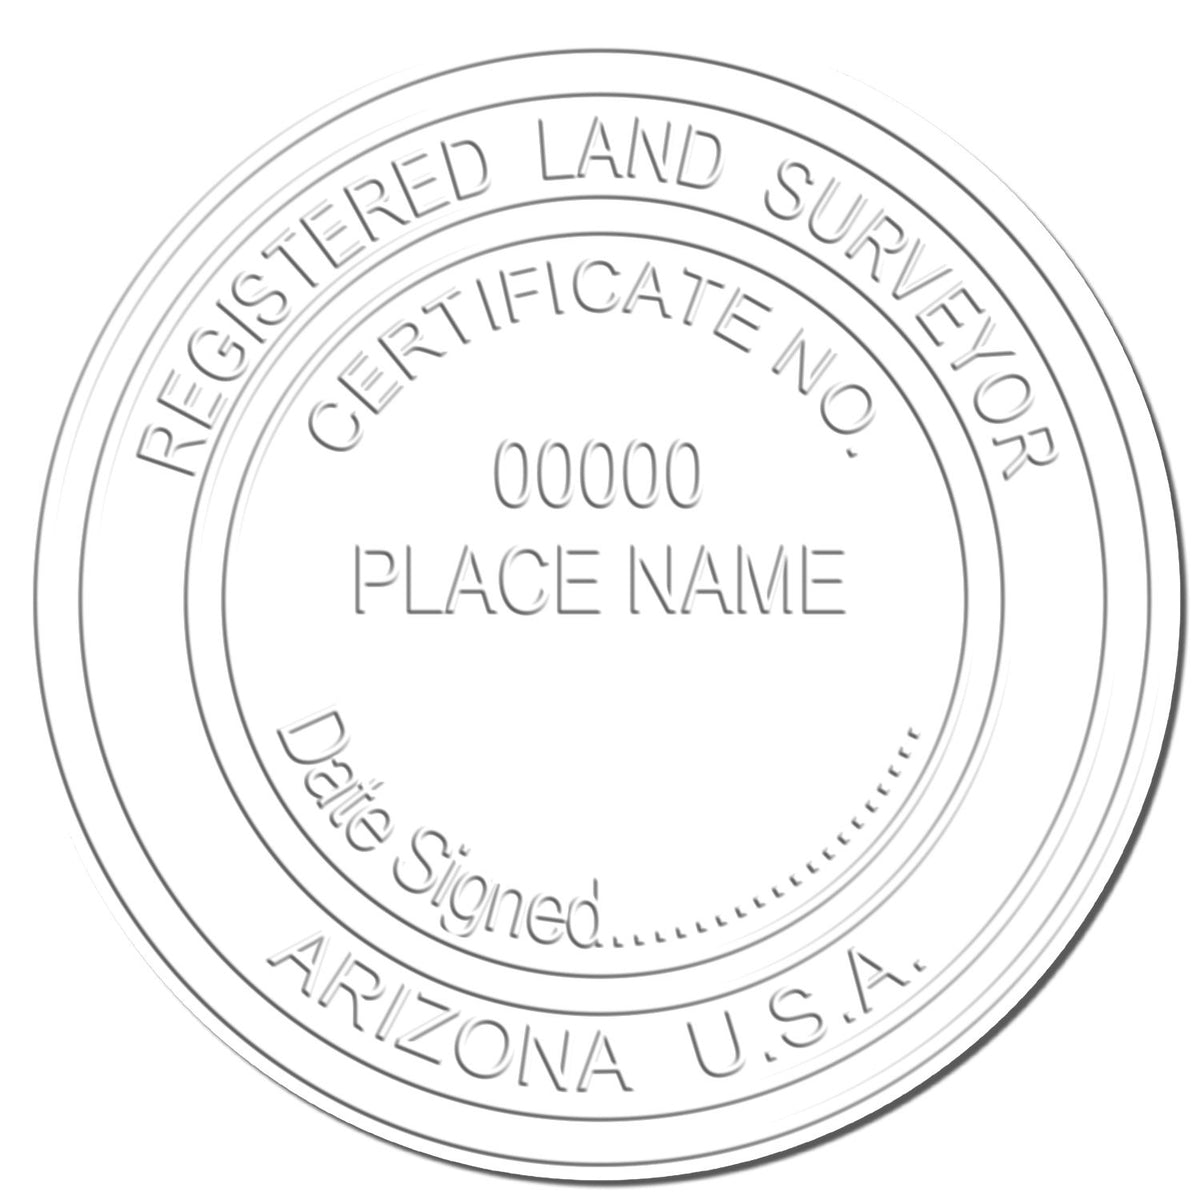 This paper is stamped with a sample imprint of the Arizona Desk Surveyor Seal Embosser, signifying its quality and reliability.